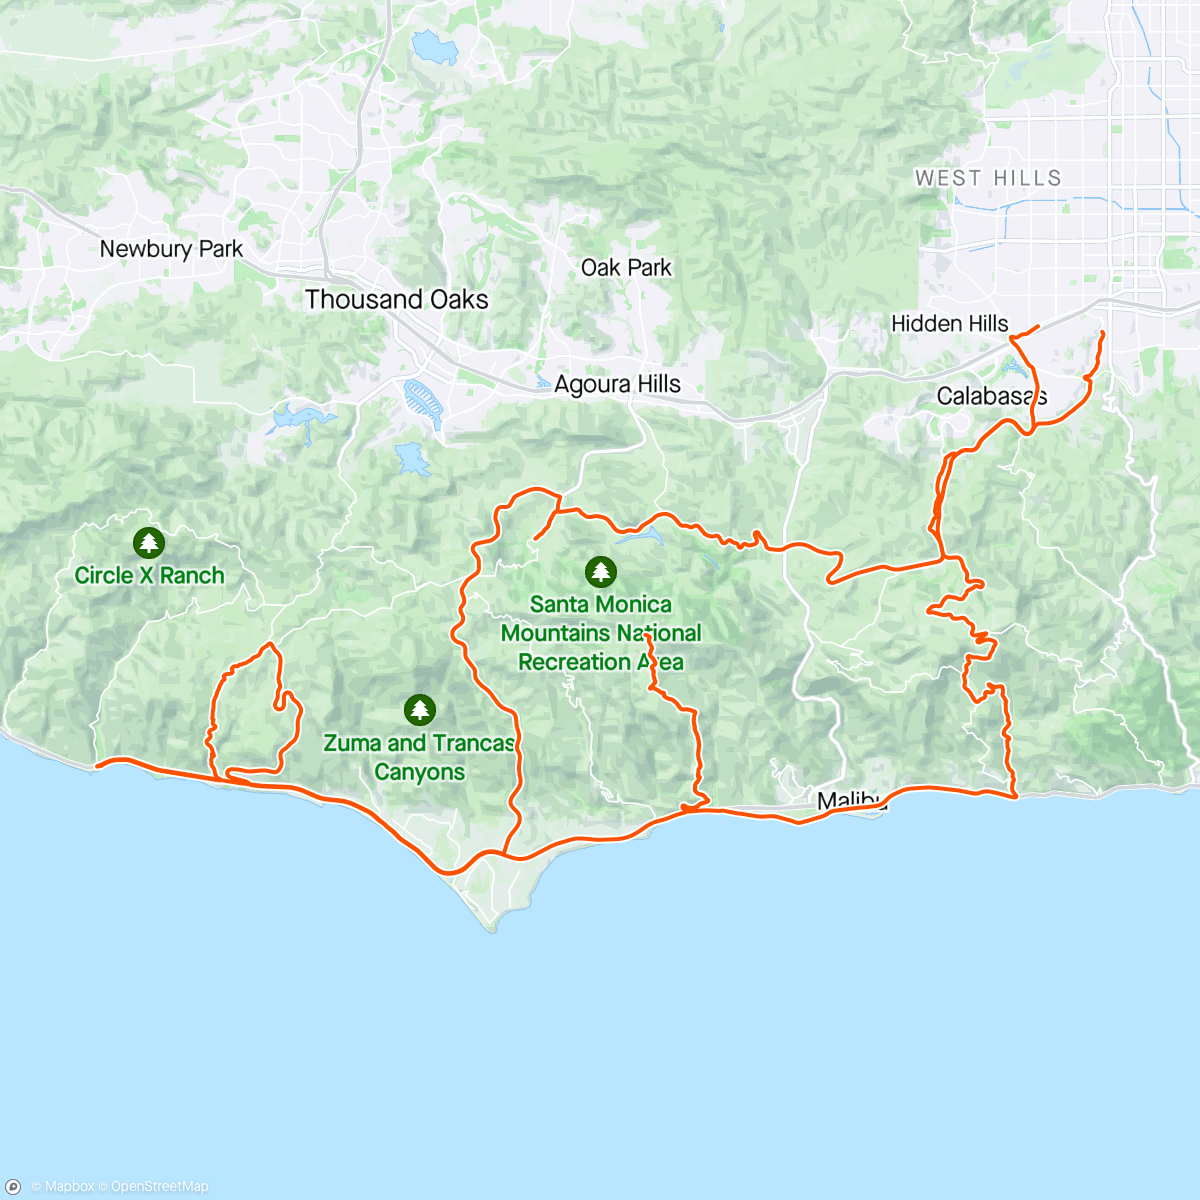 Map of the activity, Just a few weeks out from Malibu Cookie Camp so I wanted to survey the storm damage. Will have to make a couple route tweaks but plenty of climbs in great shape